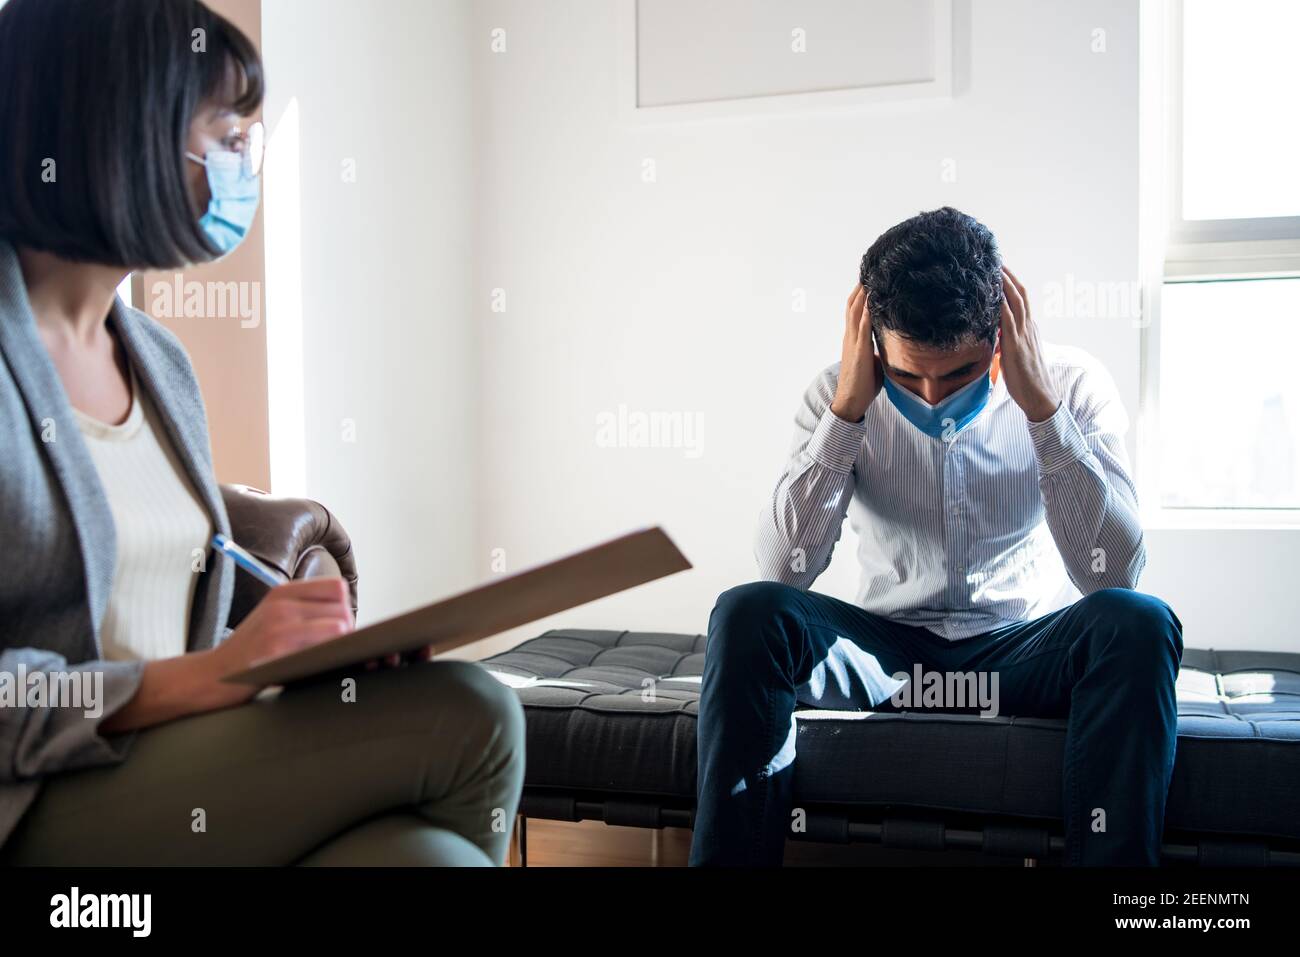 Psychologist talking with patient on therapy session. Stock Photo